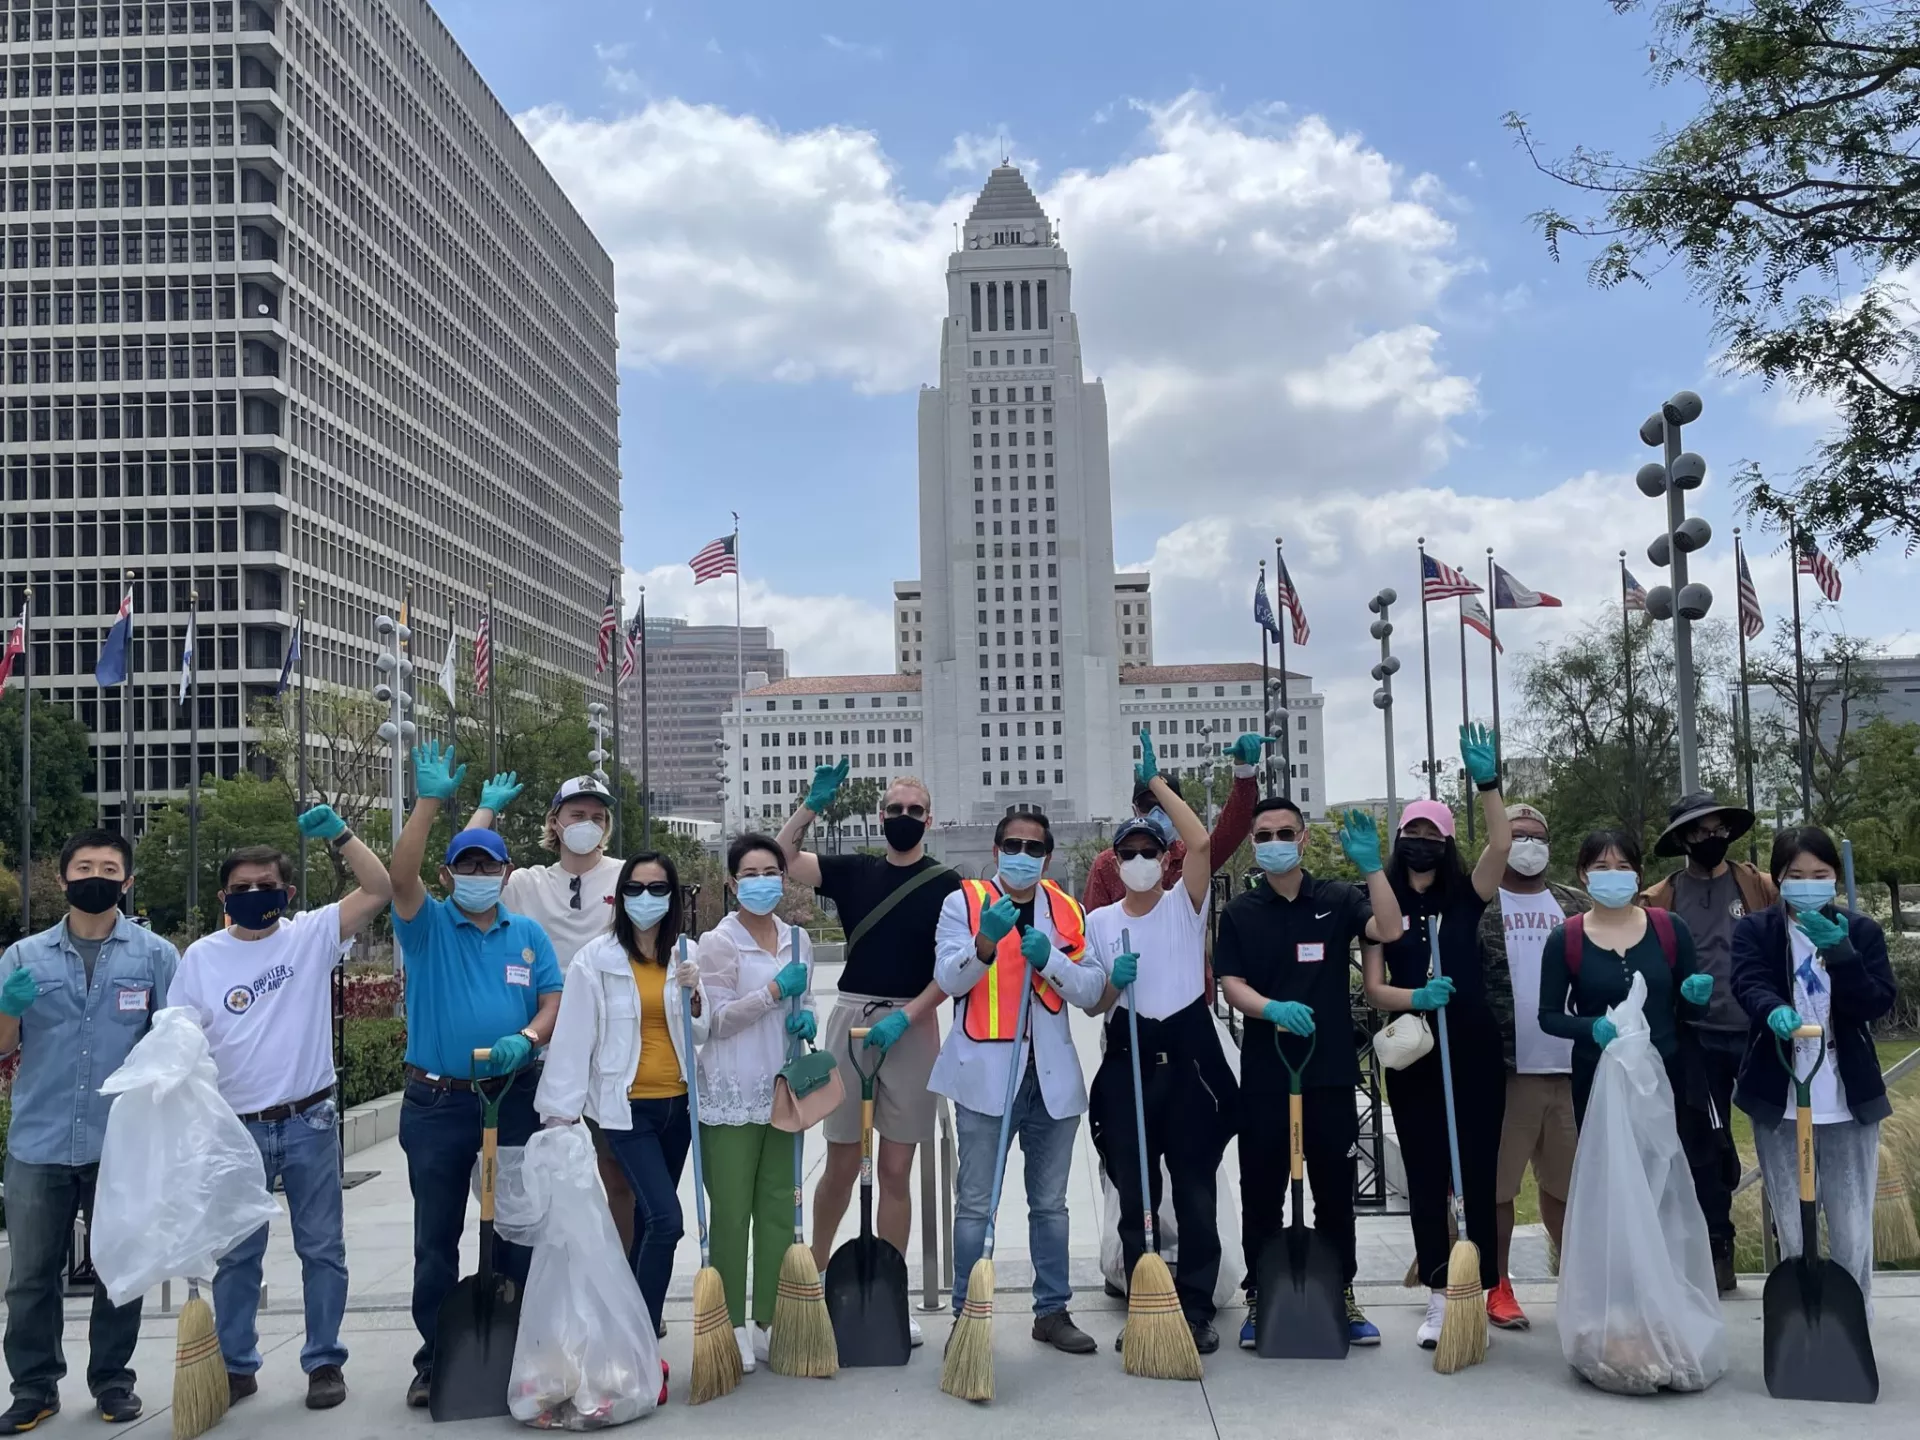 May 2 APAHM Clean up civic center